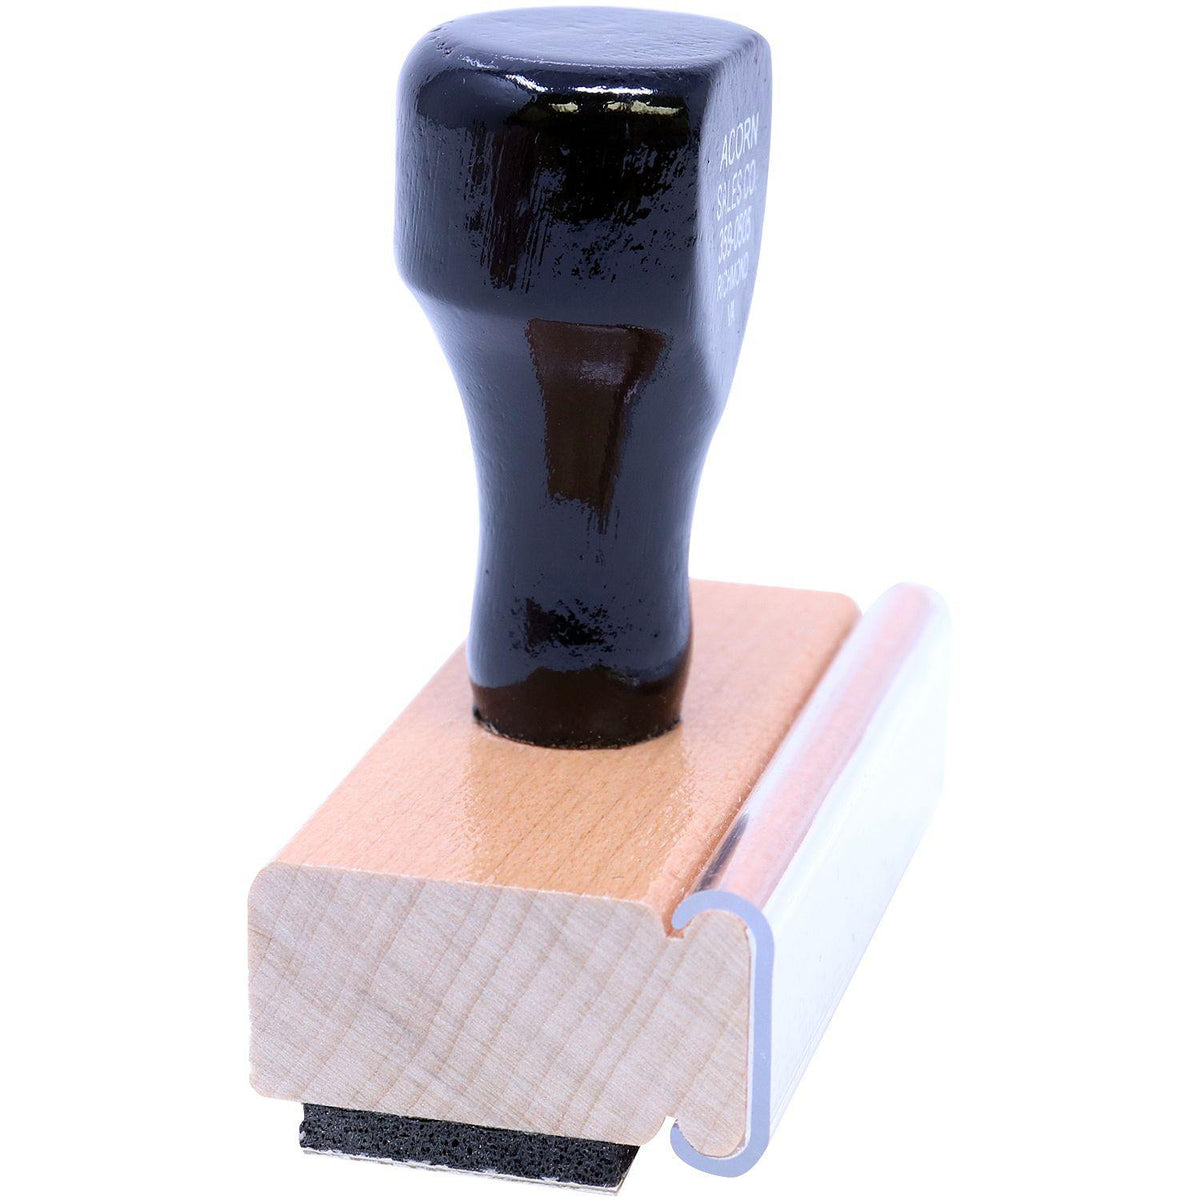 Side View of First Class Rubber Stamp at an Angle